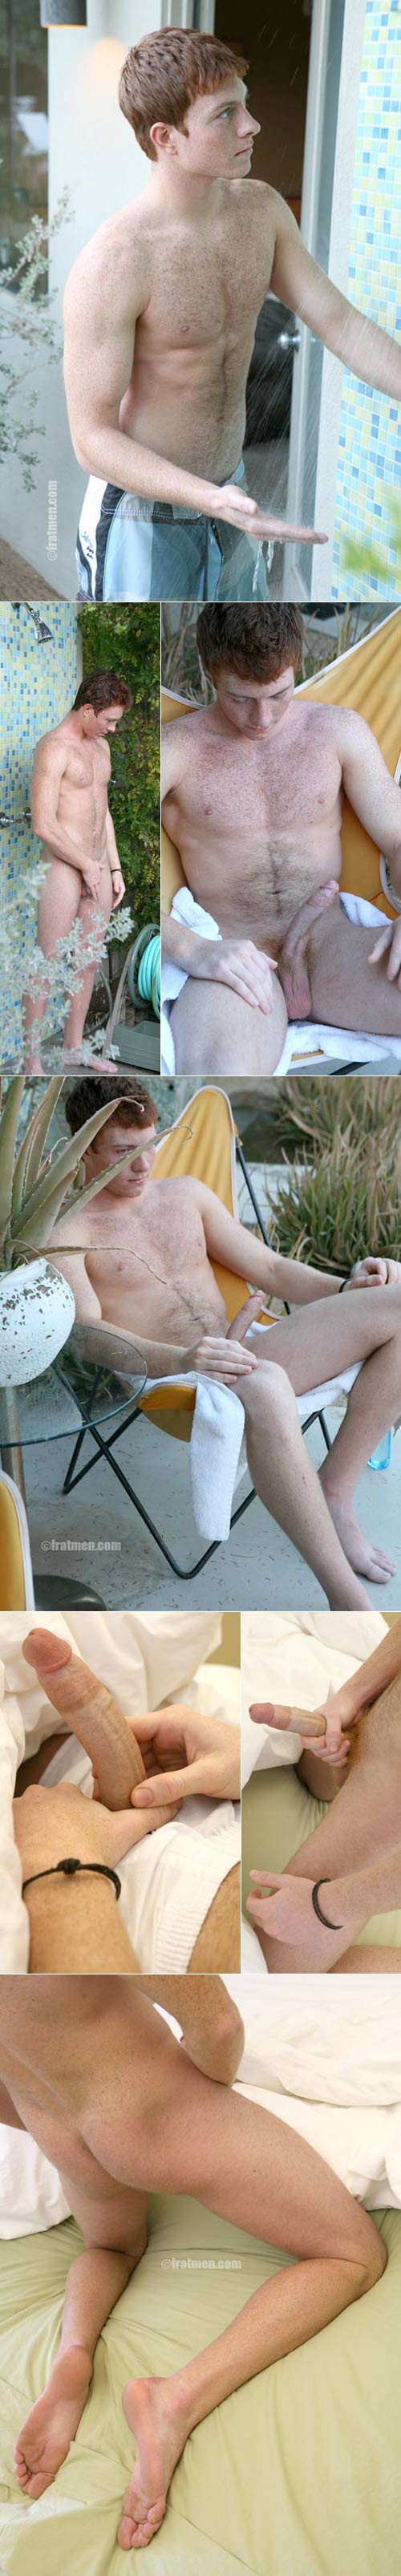 Malcolm (Naked College Redhead) at Fratmen.tv